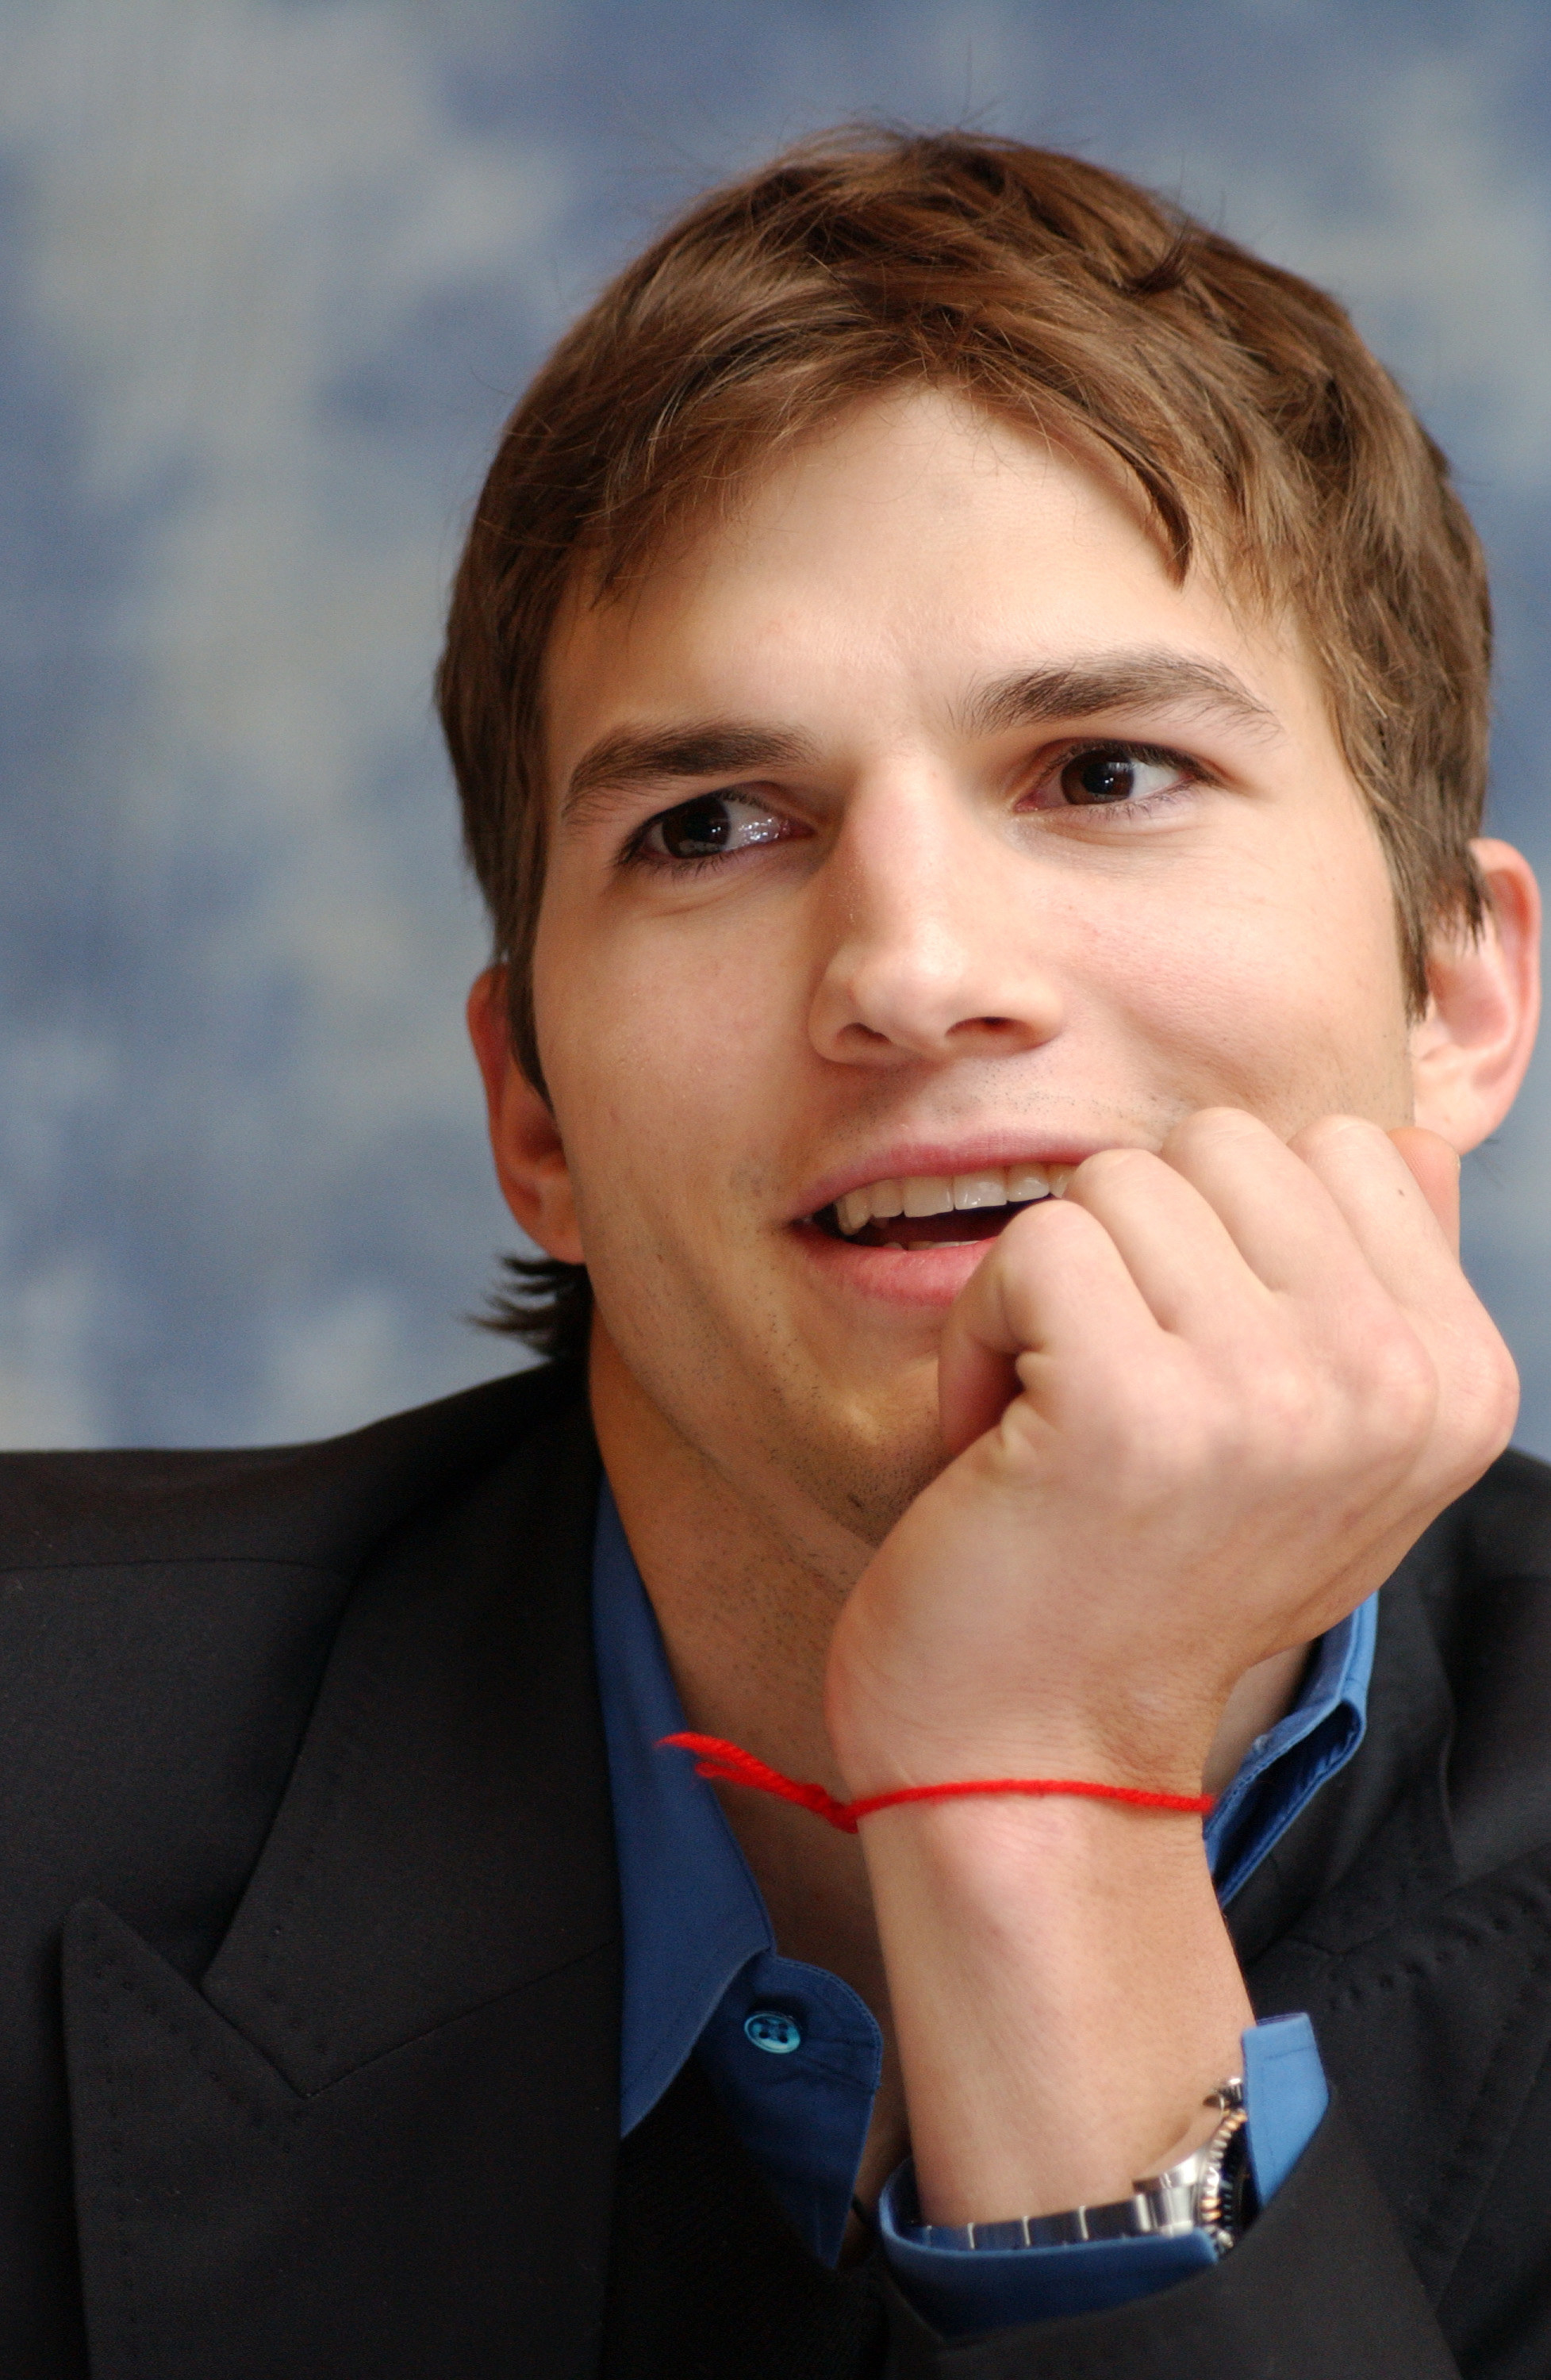 Ashton Kutcher at a press conference with a his head on his hand and a red string around his wrist 